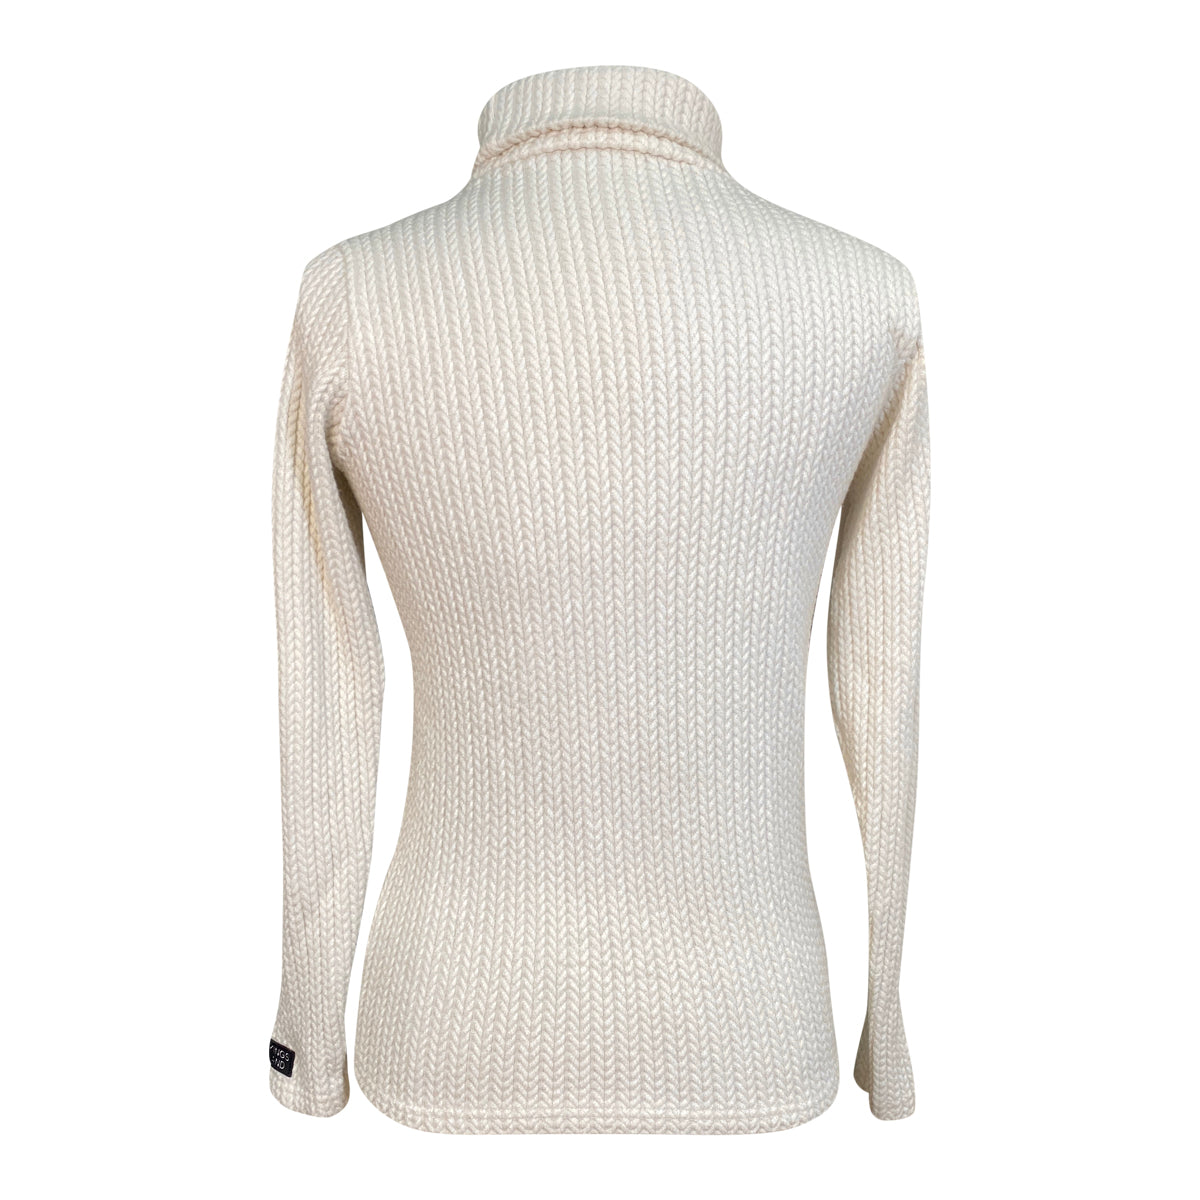 Kingsland Cable Knit Turtleneck Sweater in Ivory